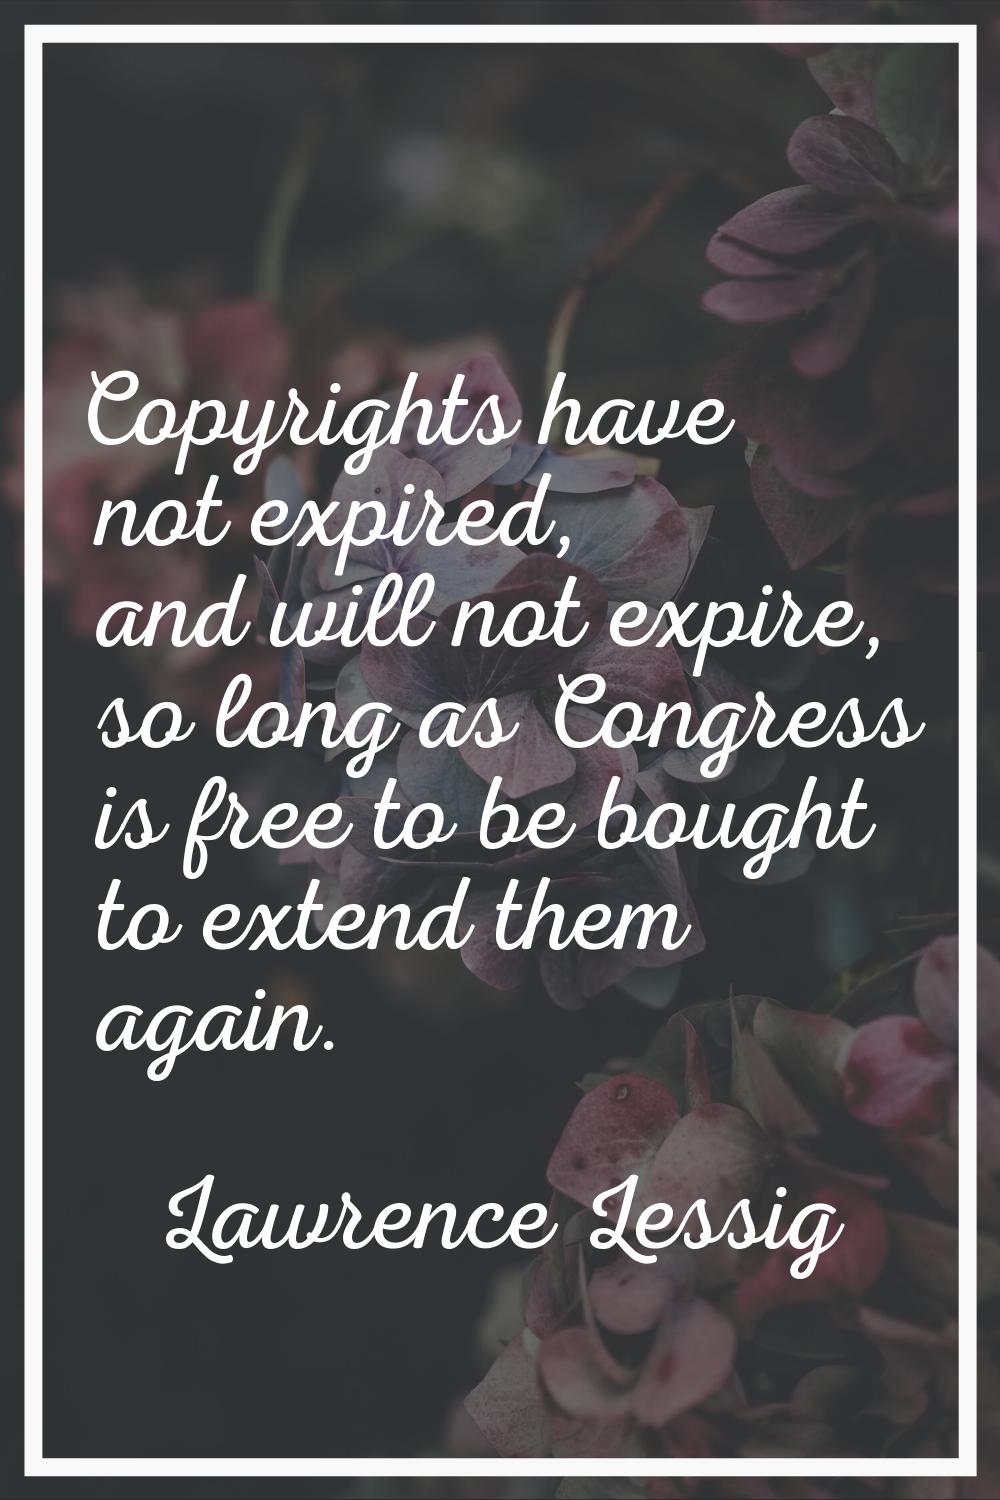 Copyrights have not expired, and will not expire, so long as Congress is free to be bought to exten